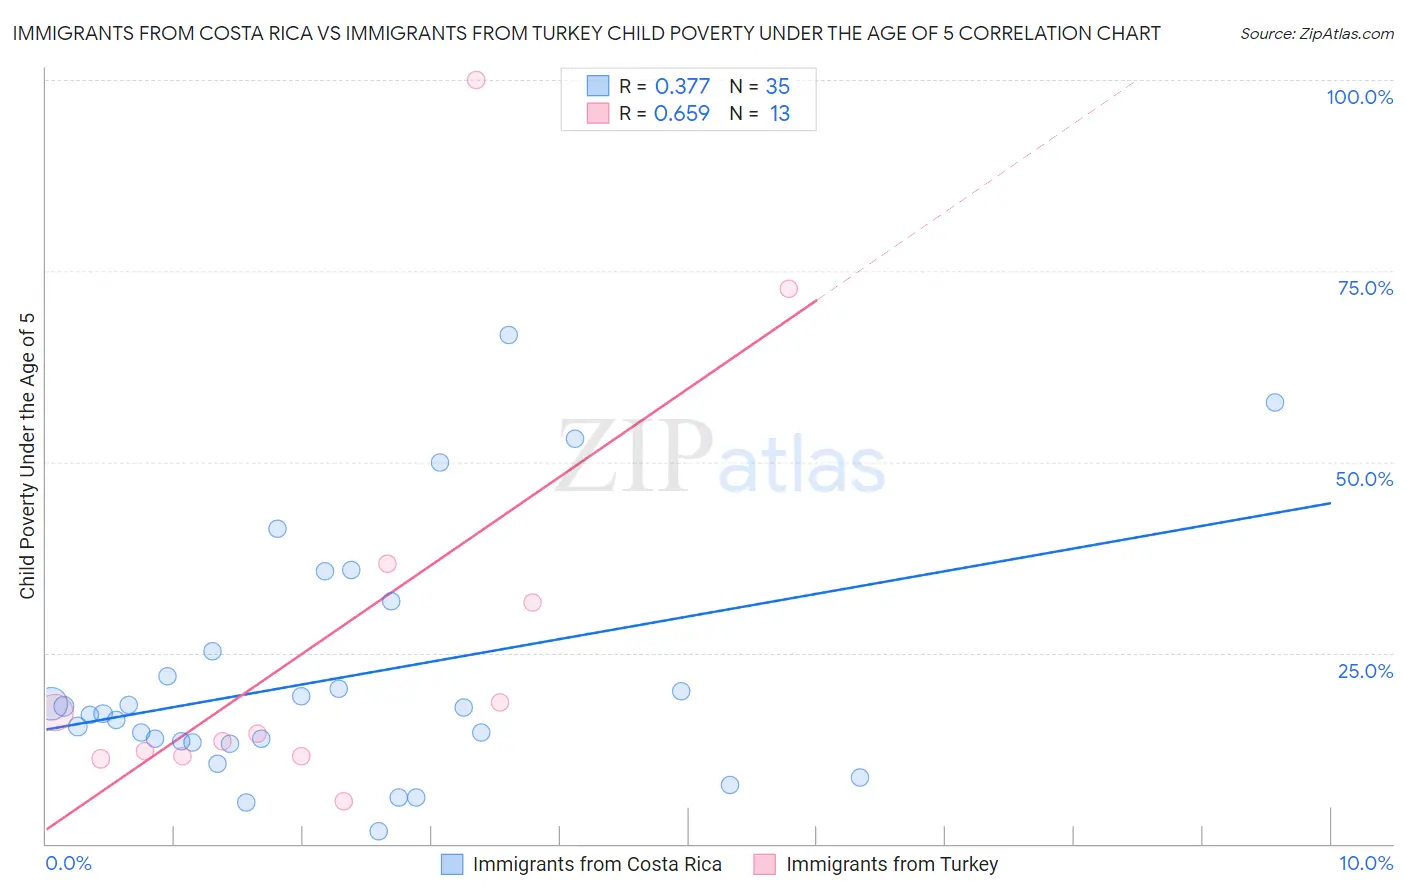 Immigrants from Costa Rica vs Immigrants from Turkey Child Poverty Under the Age of 5